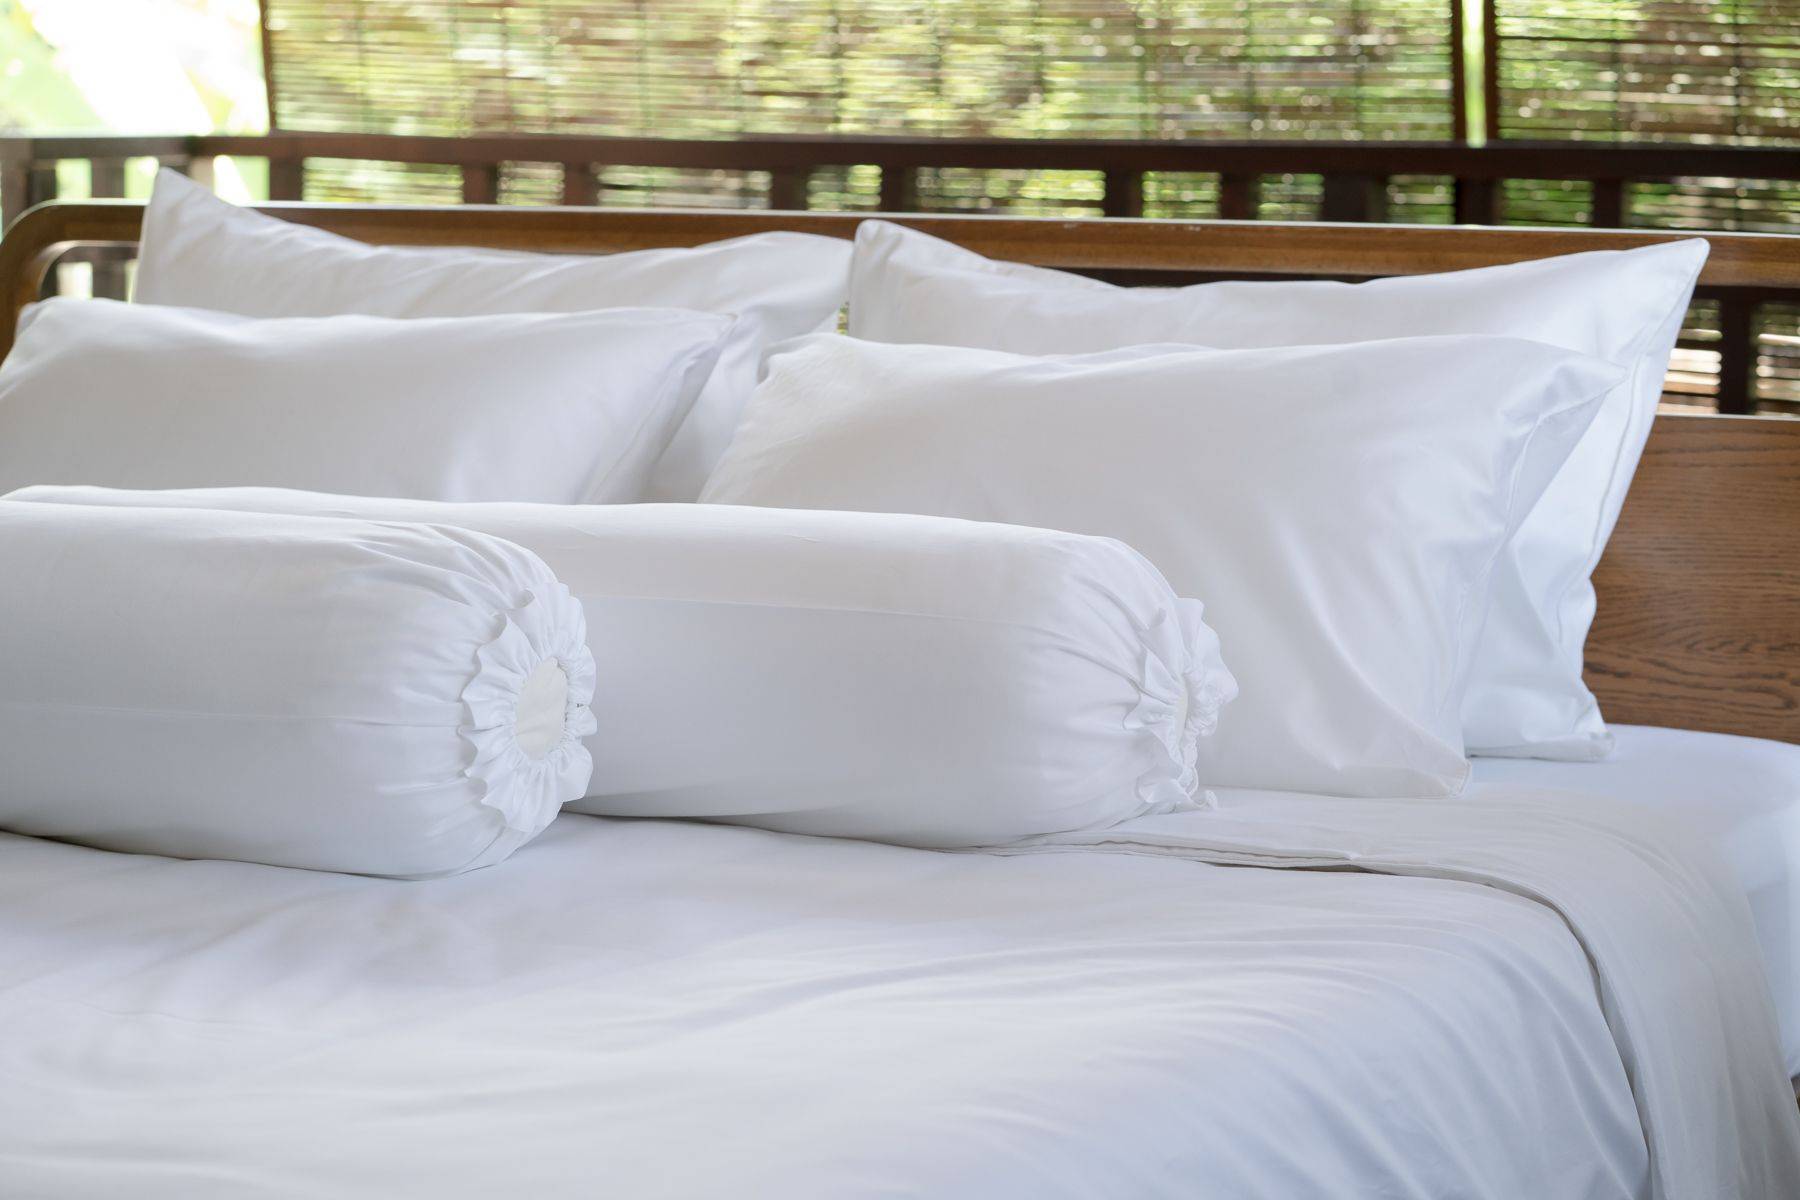 Weavve's white cotton bed sheet set with pillowcase and bolstercase